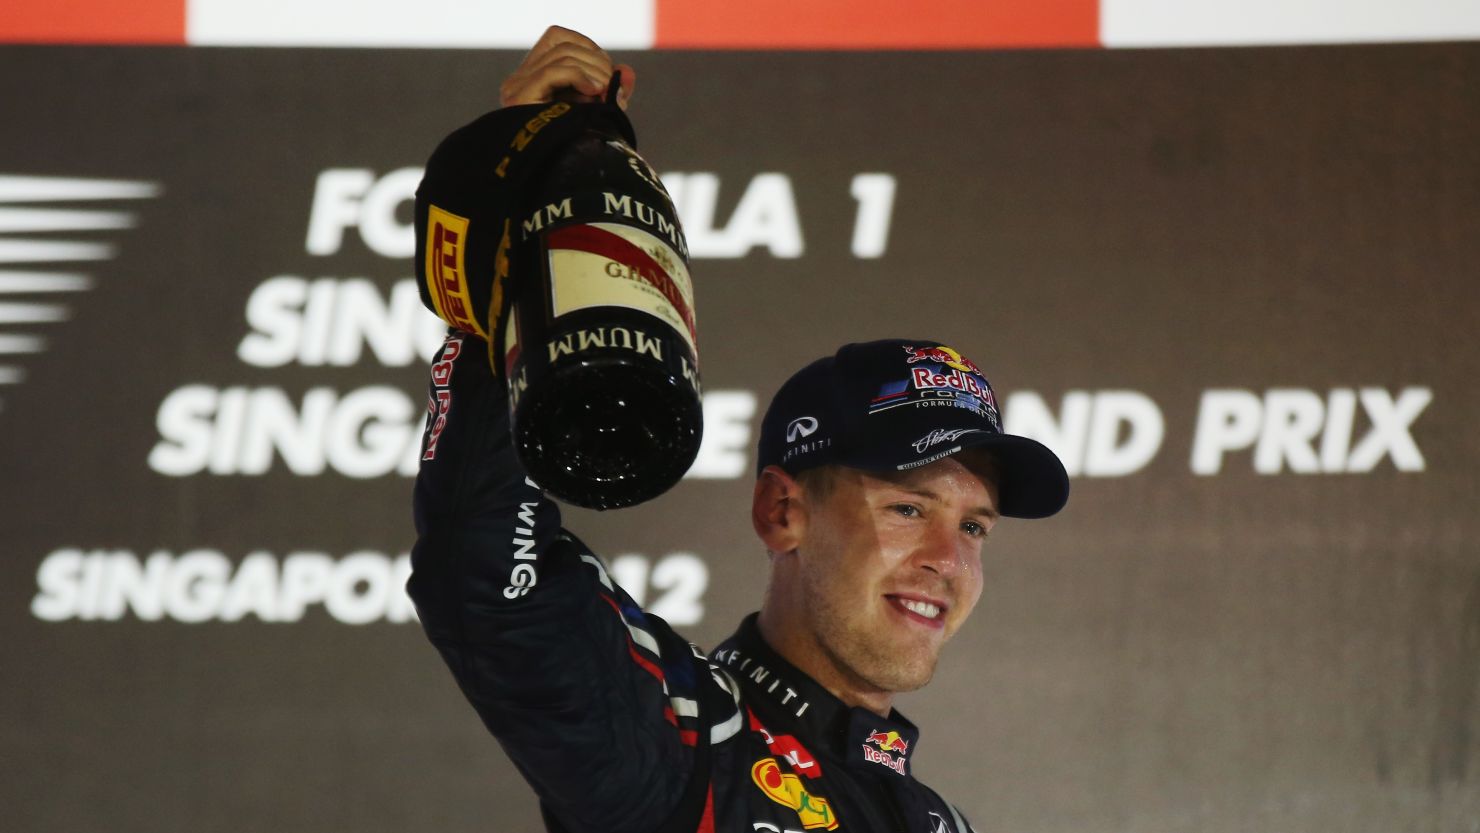 Sebastian Vettel celebrates after securing victory in Singapore for the second consecutive year.